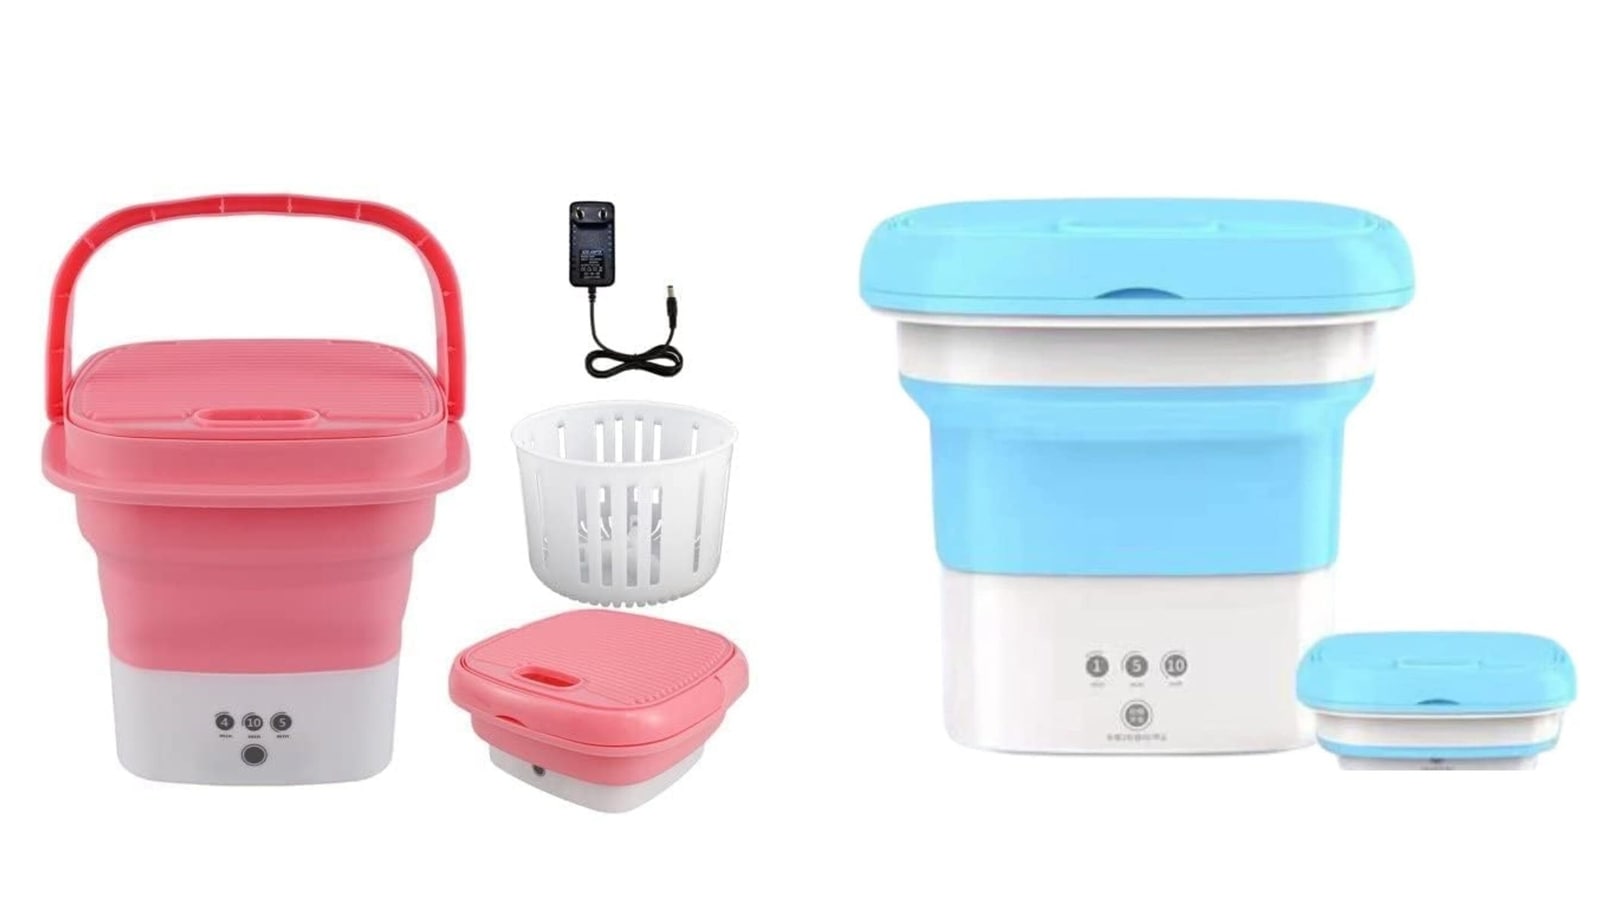 Mini portable washing machine: 10 options to check out in October